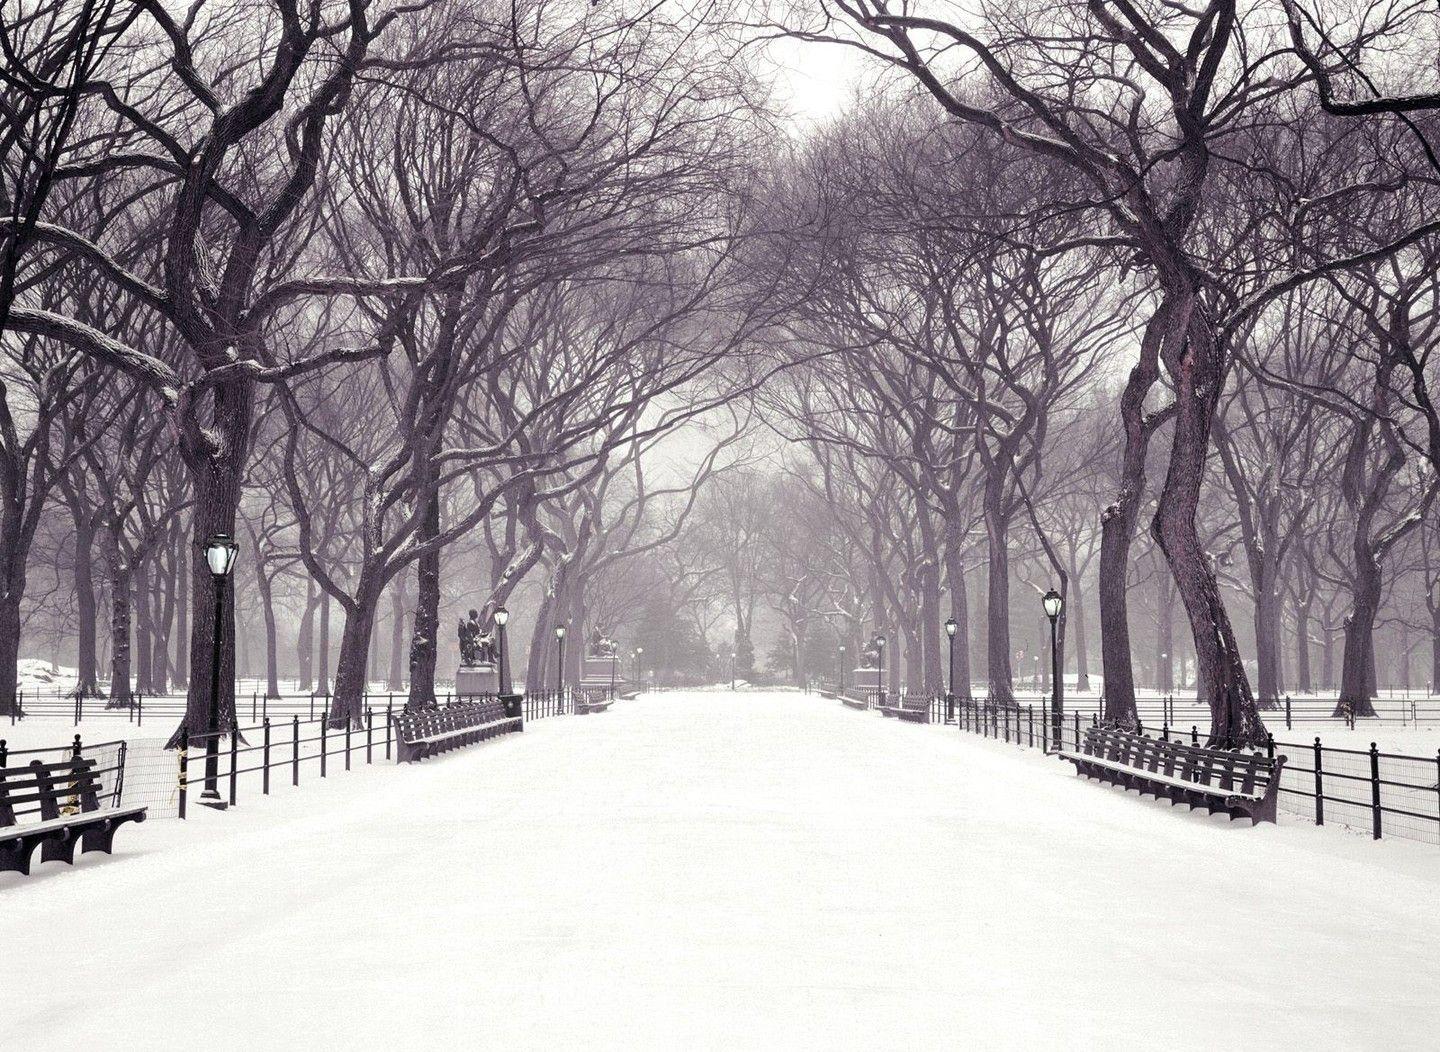 Central Park in the #snow! #wallpaper #newyork #winter